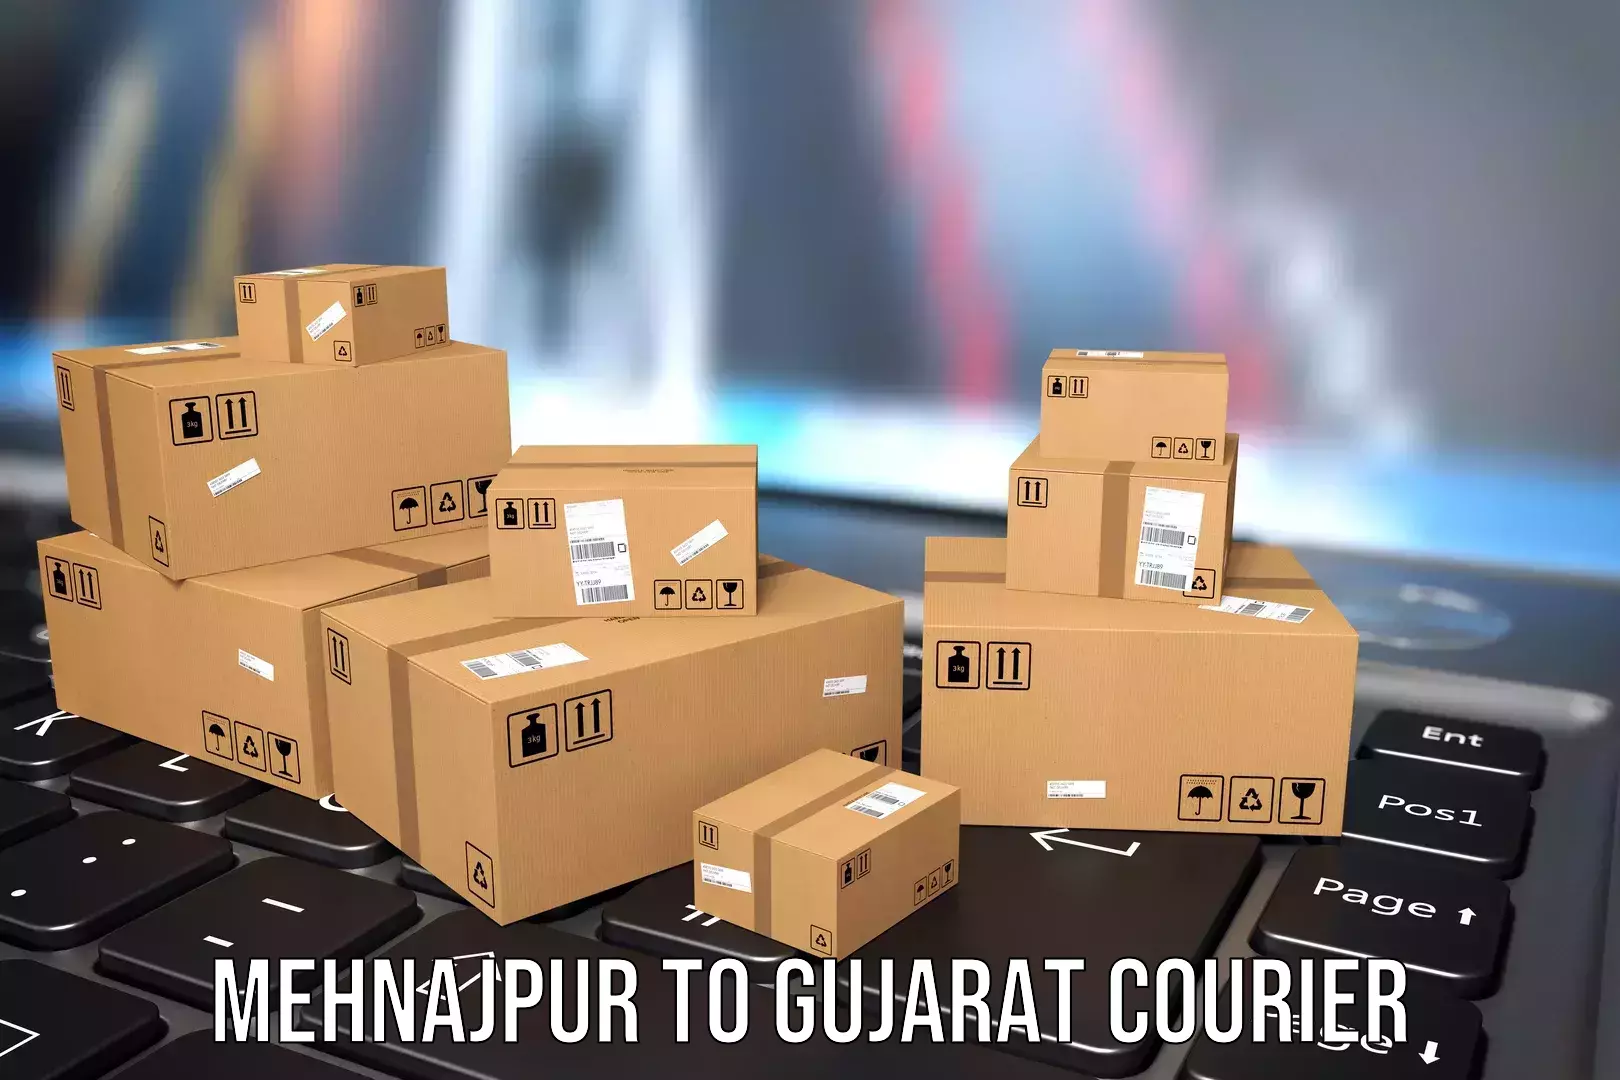 Luggage transport company Mehnajpur to Anand Agricultural University